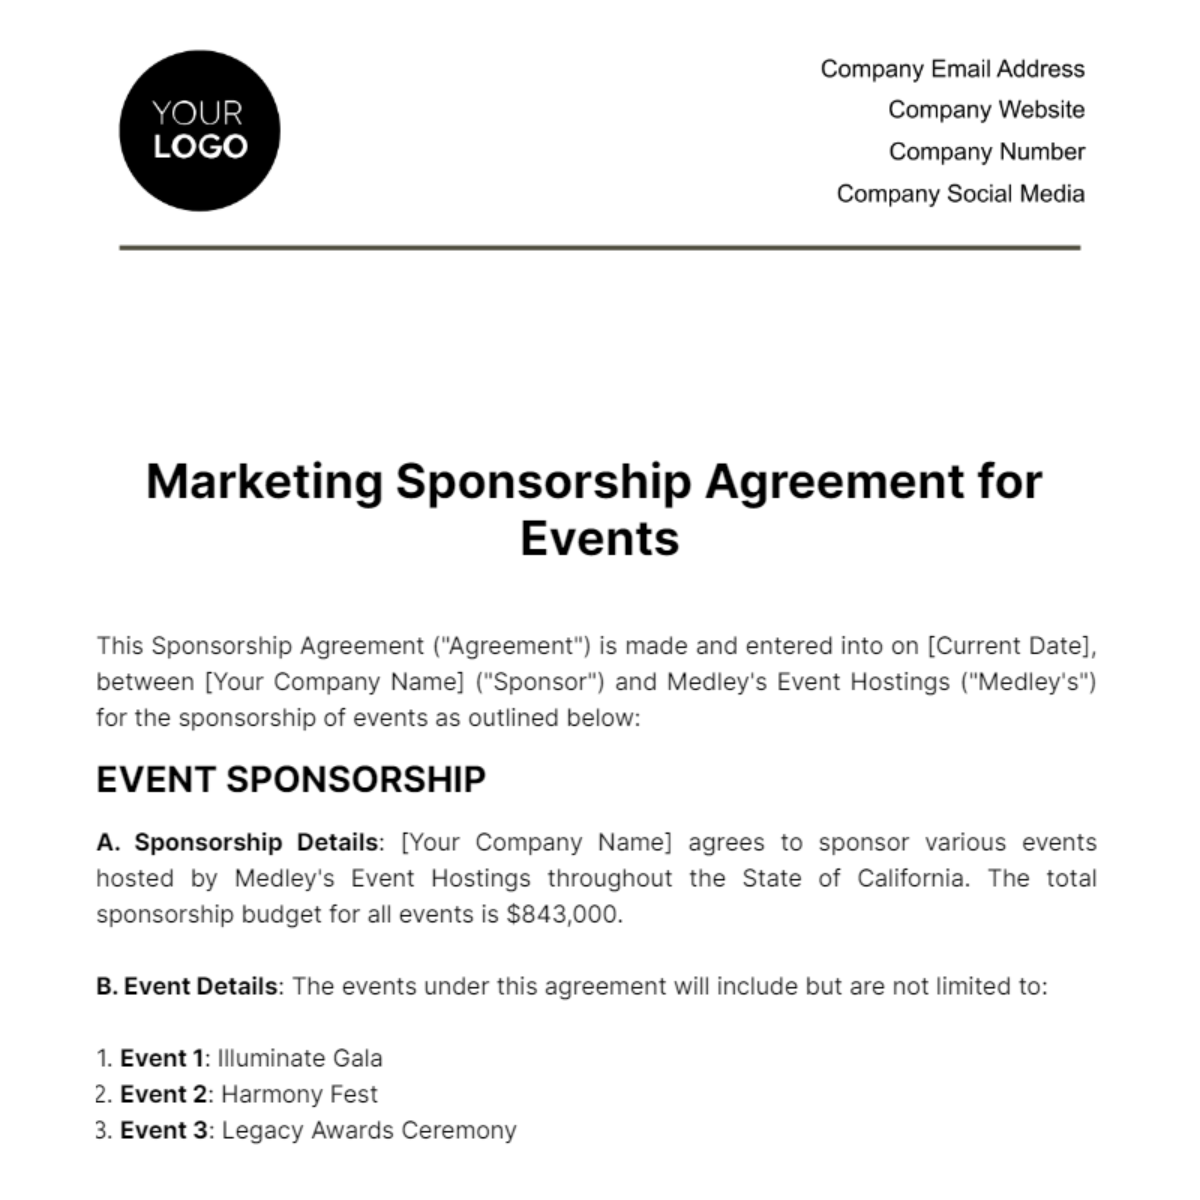 Marketing Sponsorship Agreement for Events Template